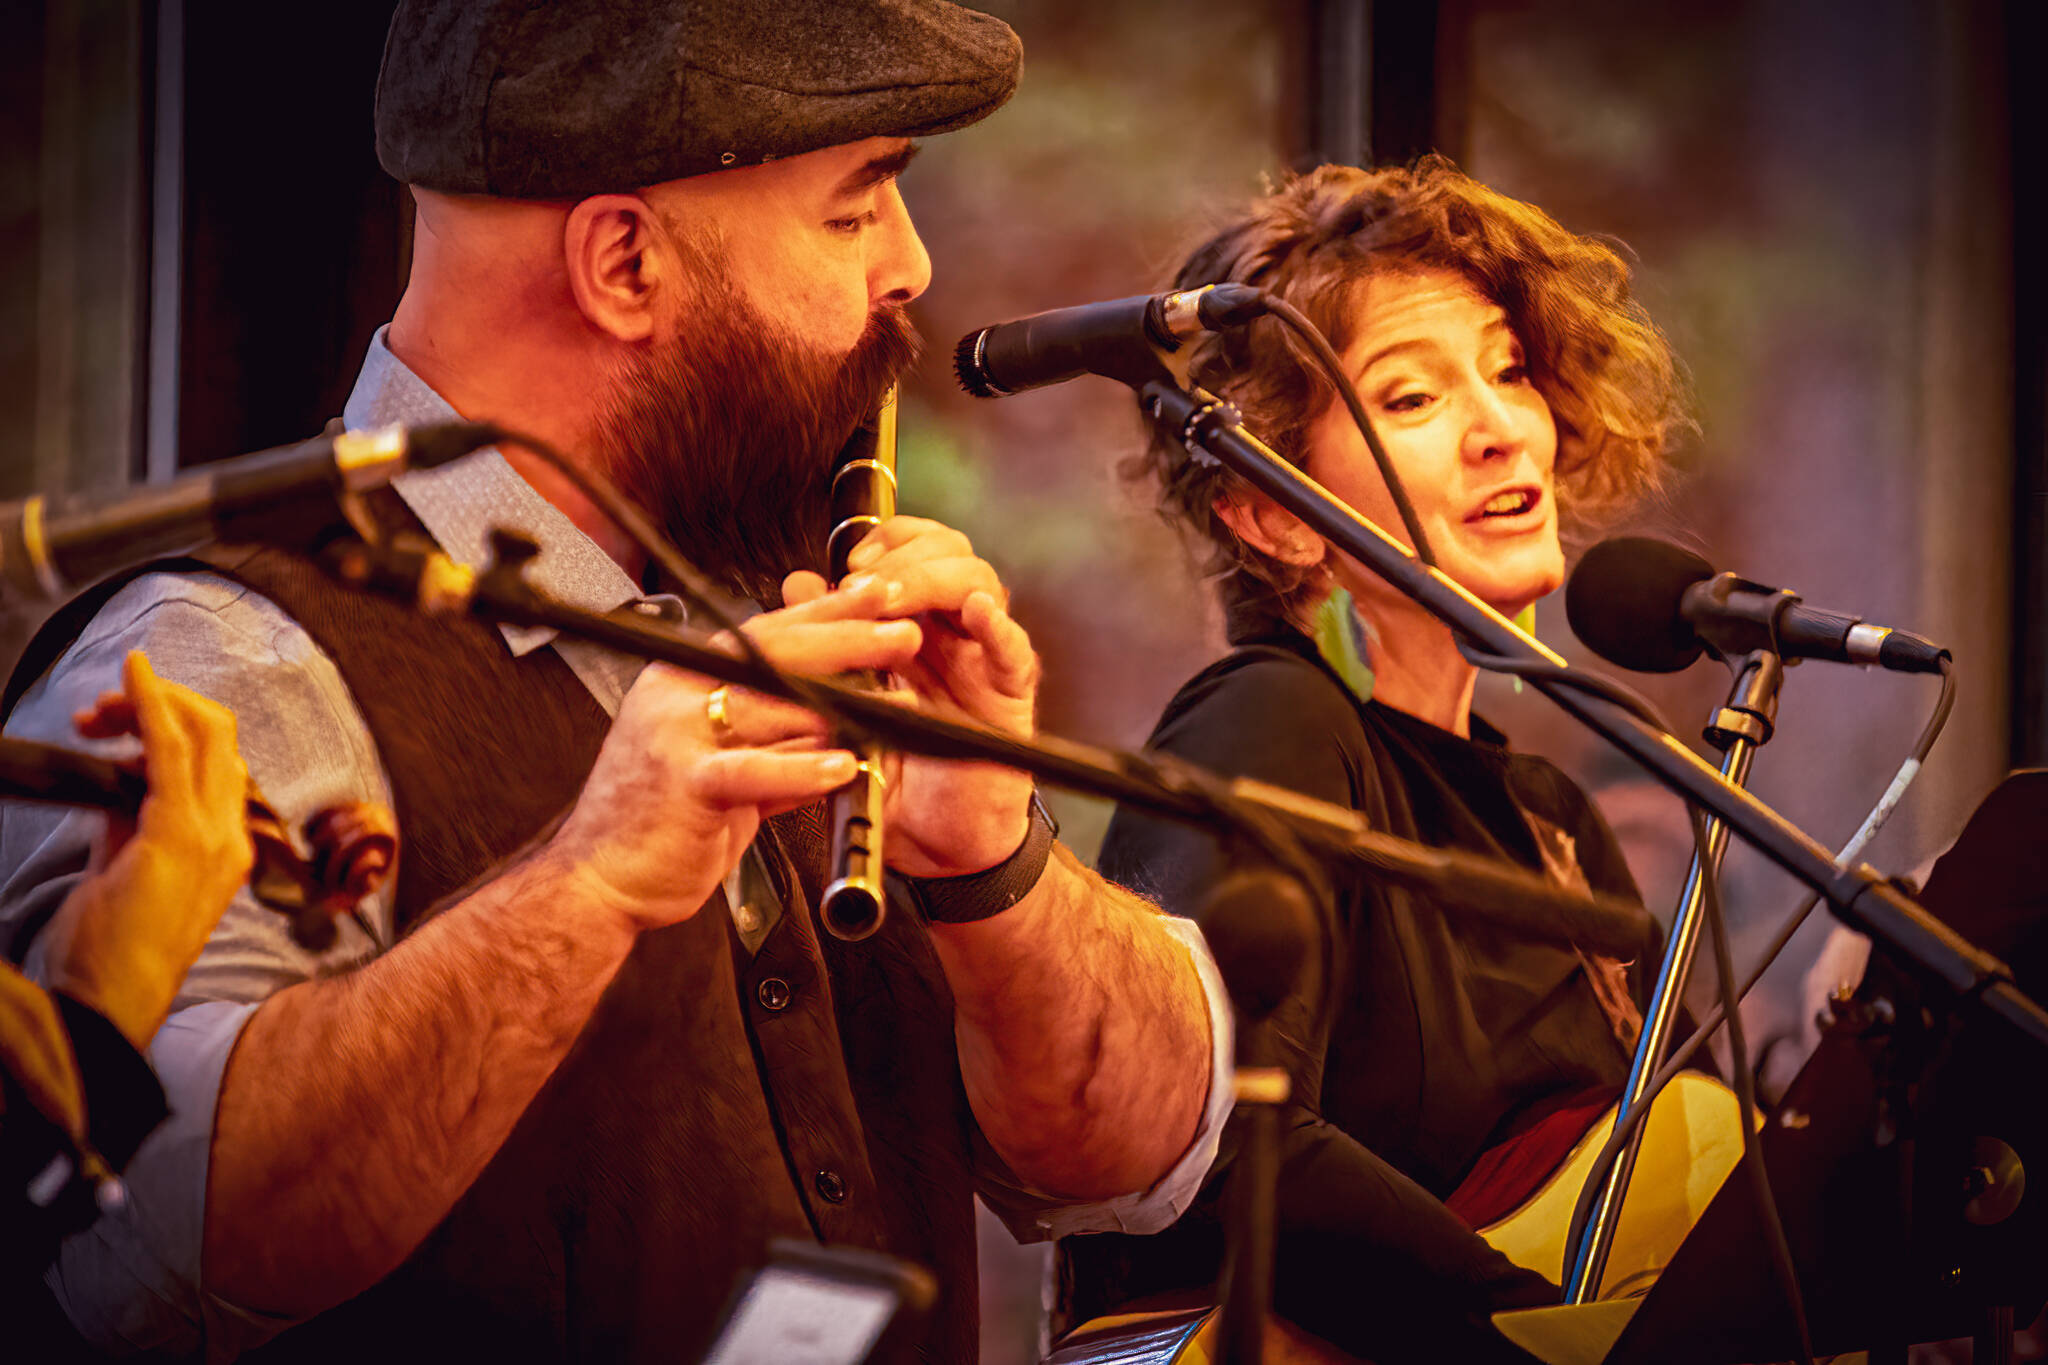 Michael Albert and Abigail Lennox of the Beggar Boys perform during a previous Whidbey Island Music Festival concert. (Photo by Dennis Browne)